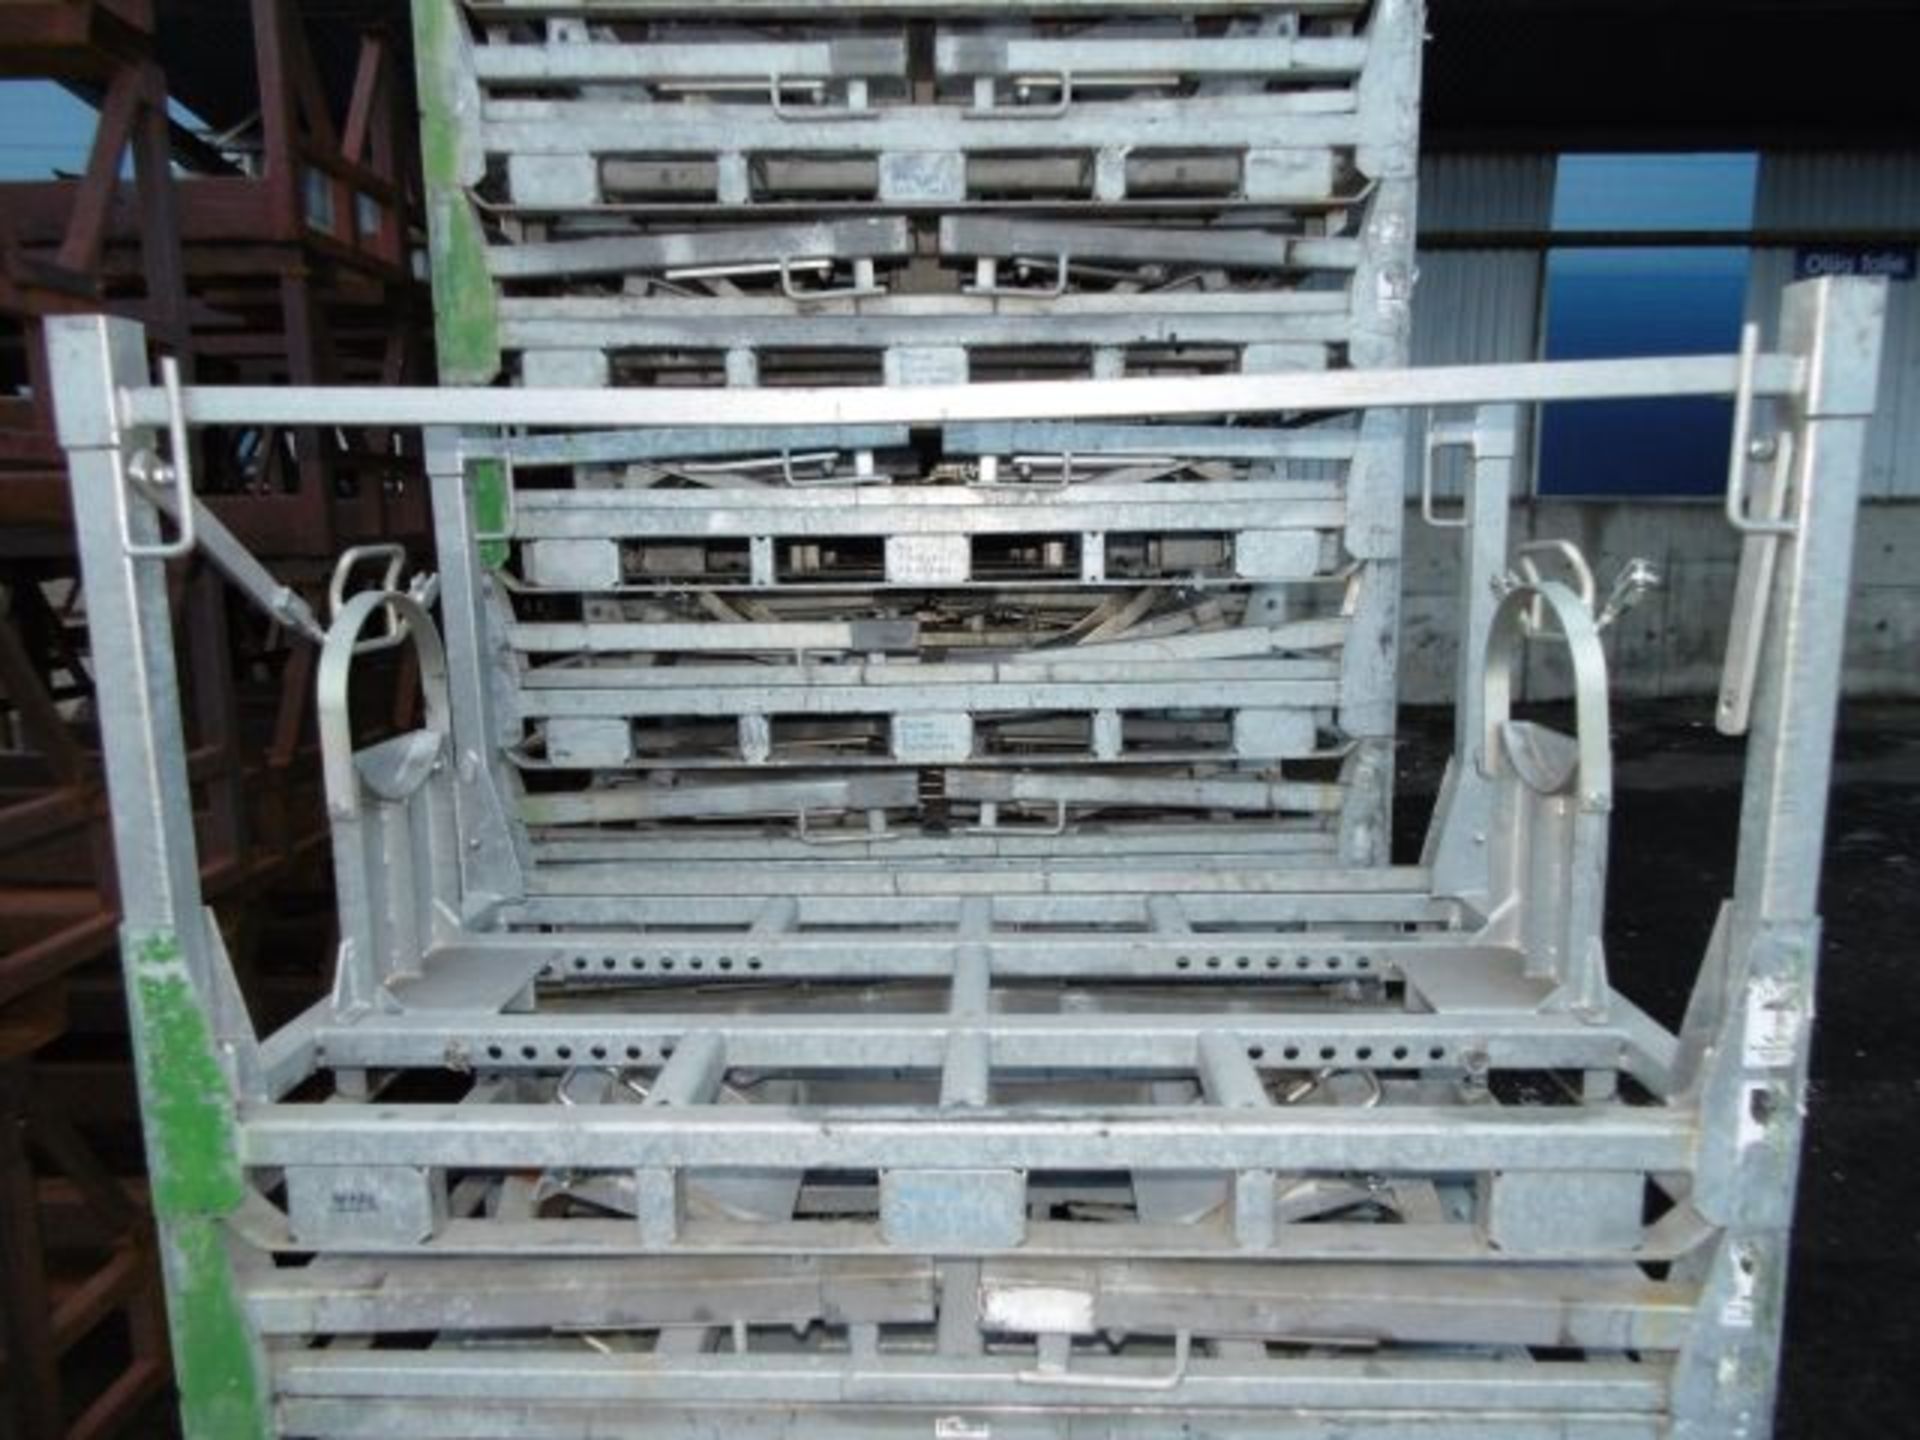 * 20 x Folding/Stackable Galvanised Steel Stillages; each 1950 x 1000mm. Loaded onto Buyer's